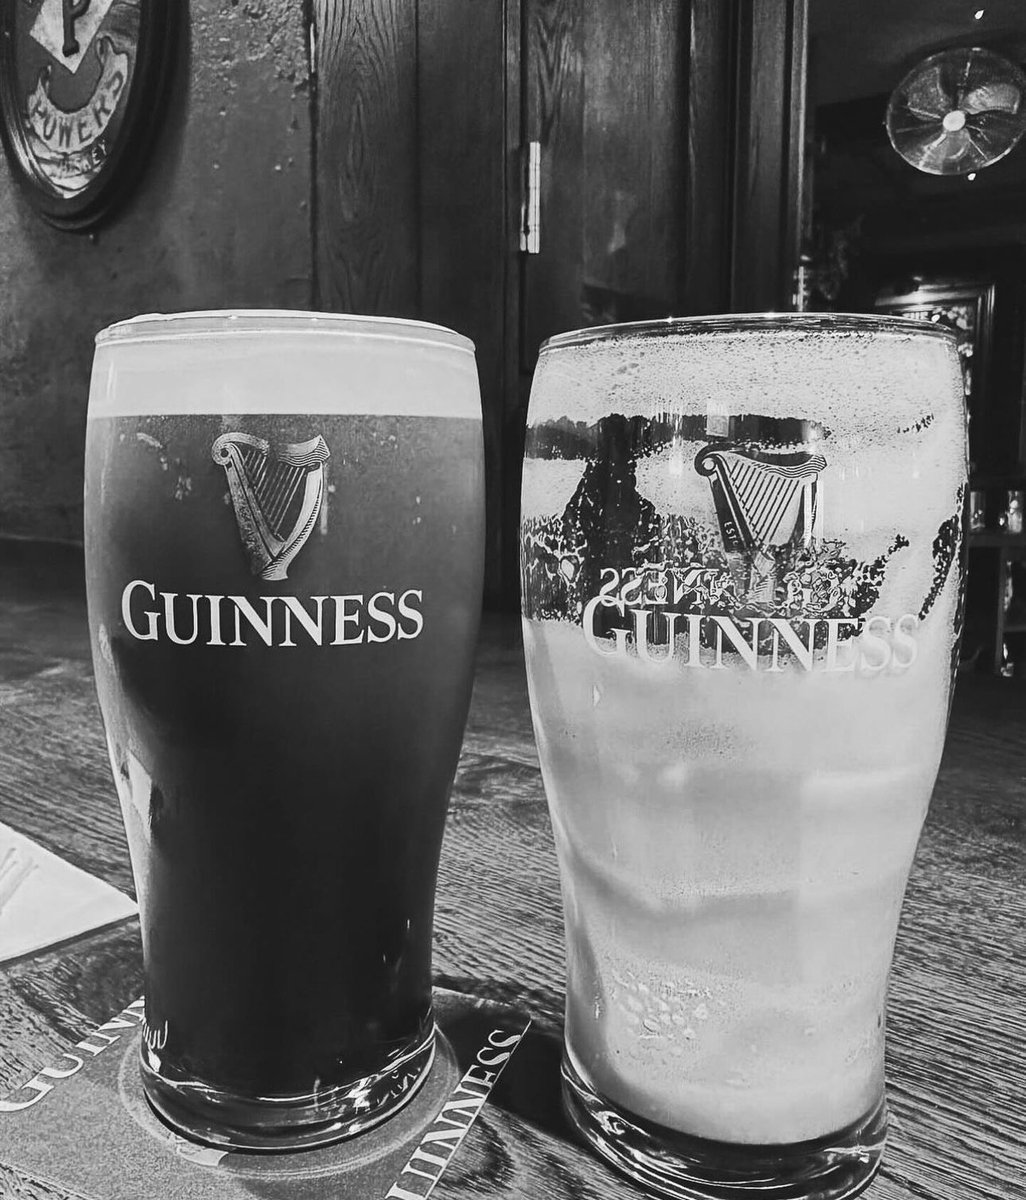 Enjoy some cold creamy Pints with us here in The Auld Dubliner today ☘️ #theaulddubliner #pub #templebar #dublin #dublinpubs #sunday #bankholidayweekend